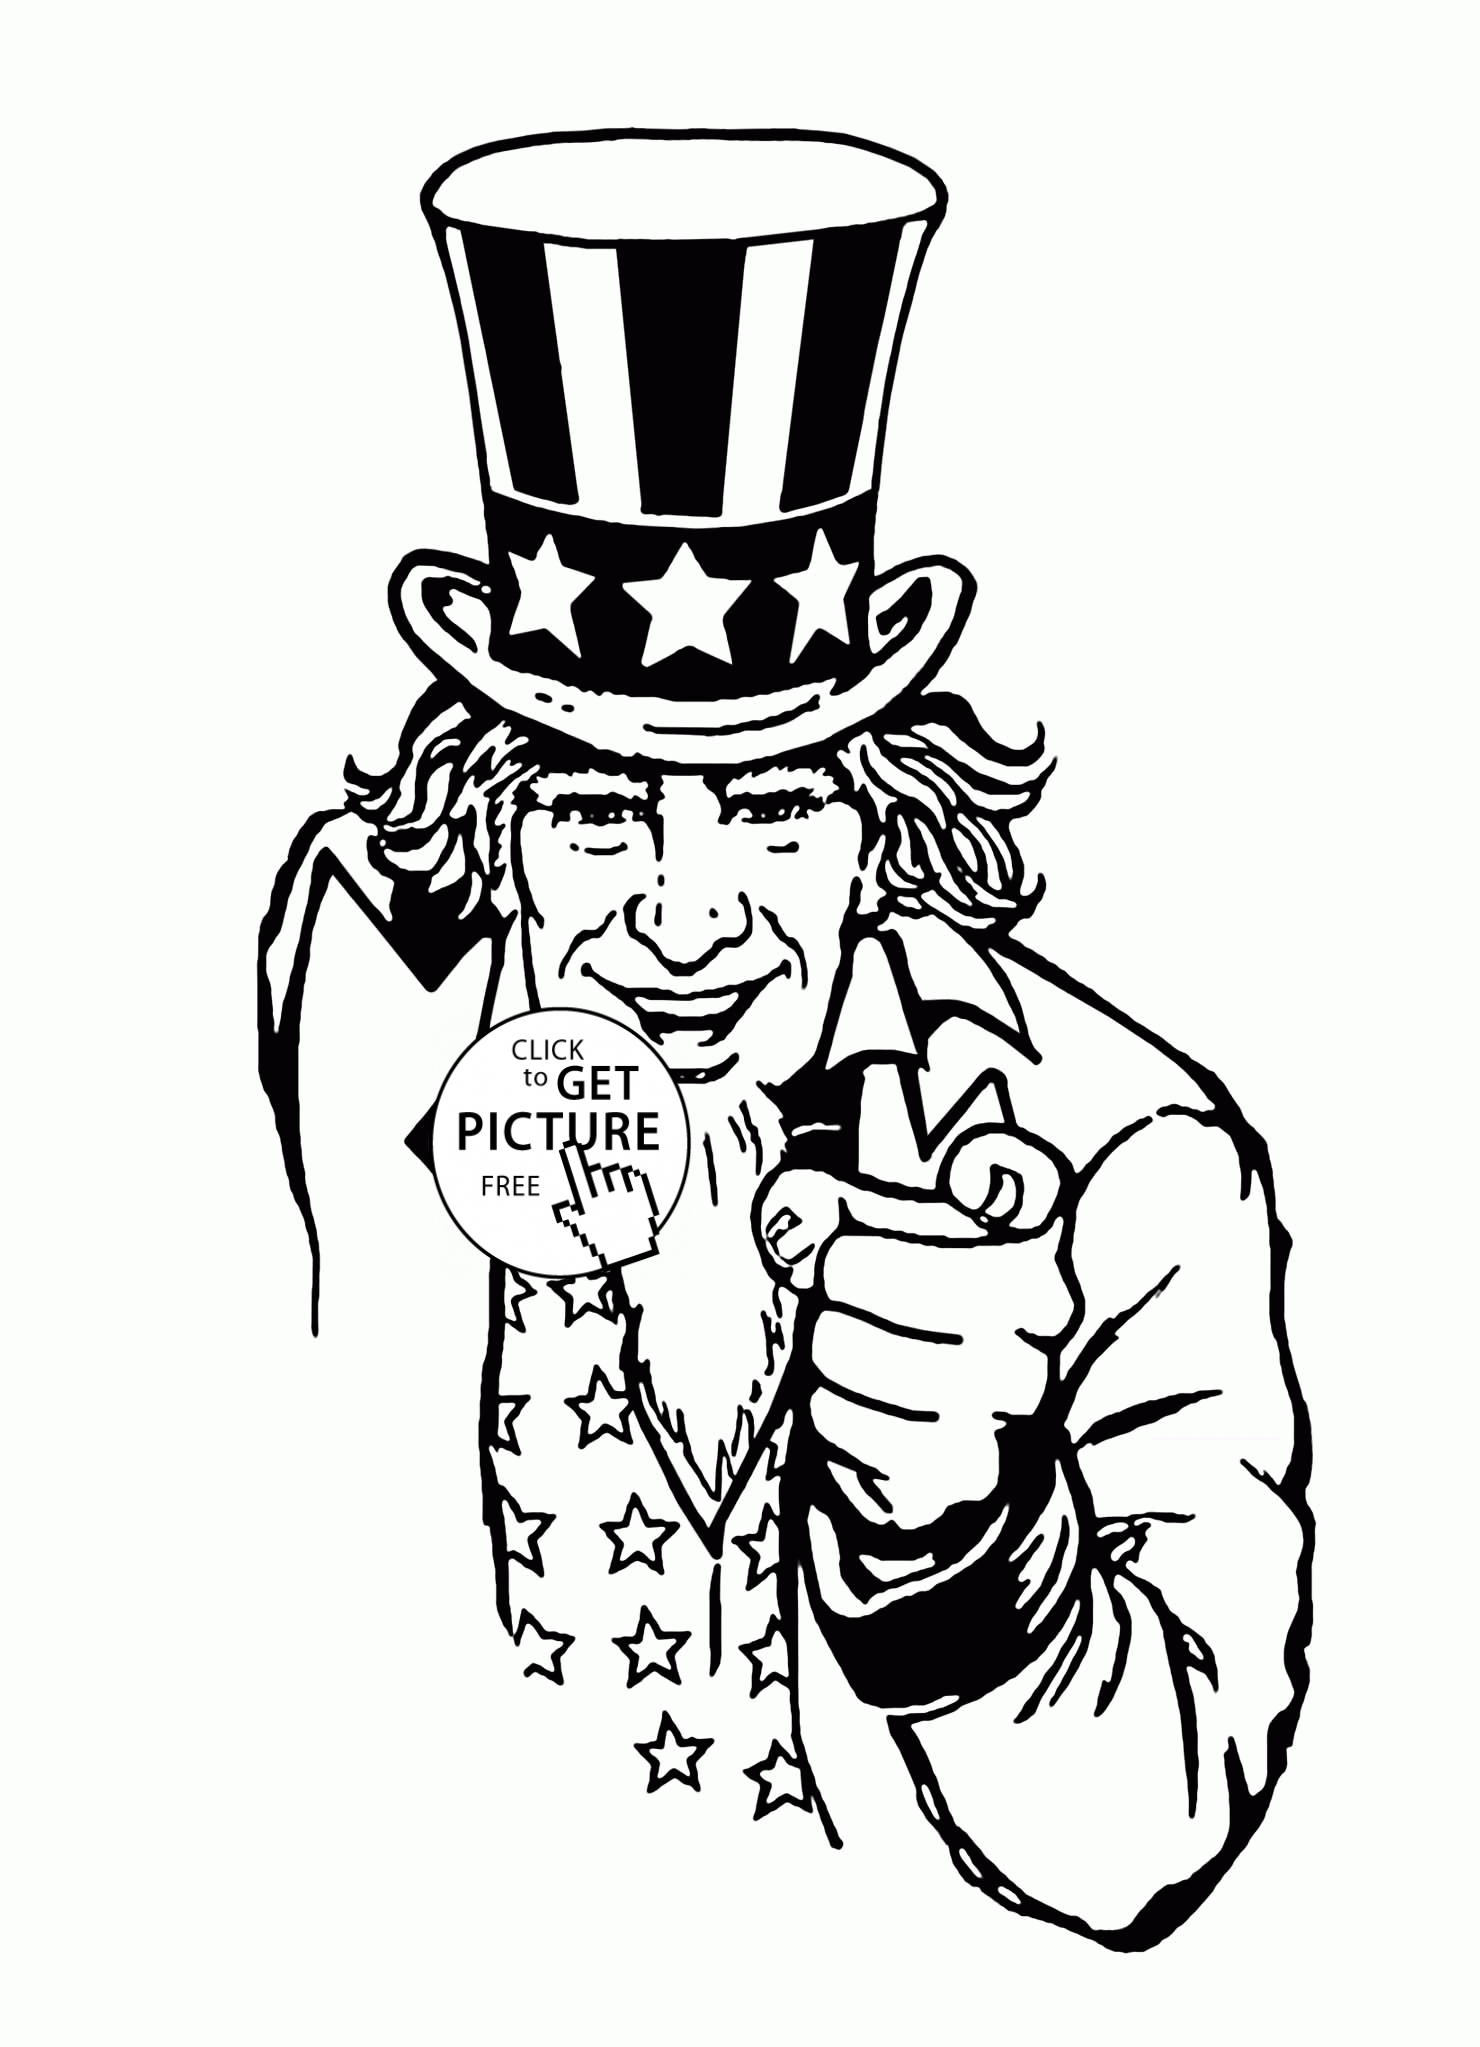 Uncle sam coloring page for kids coloring pages printables free